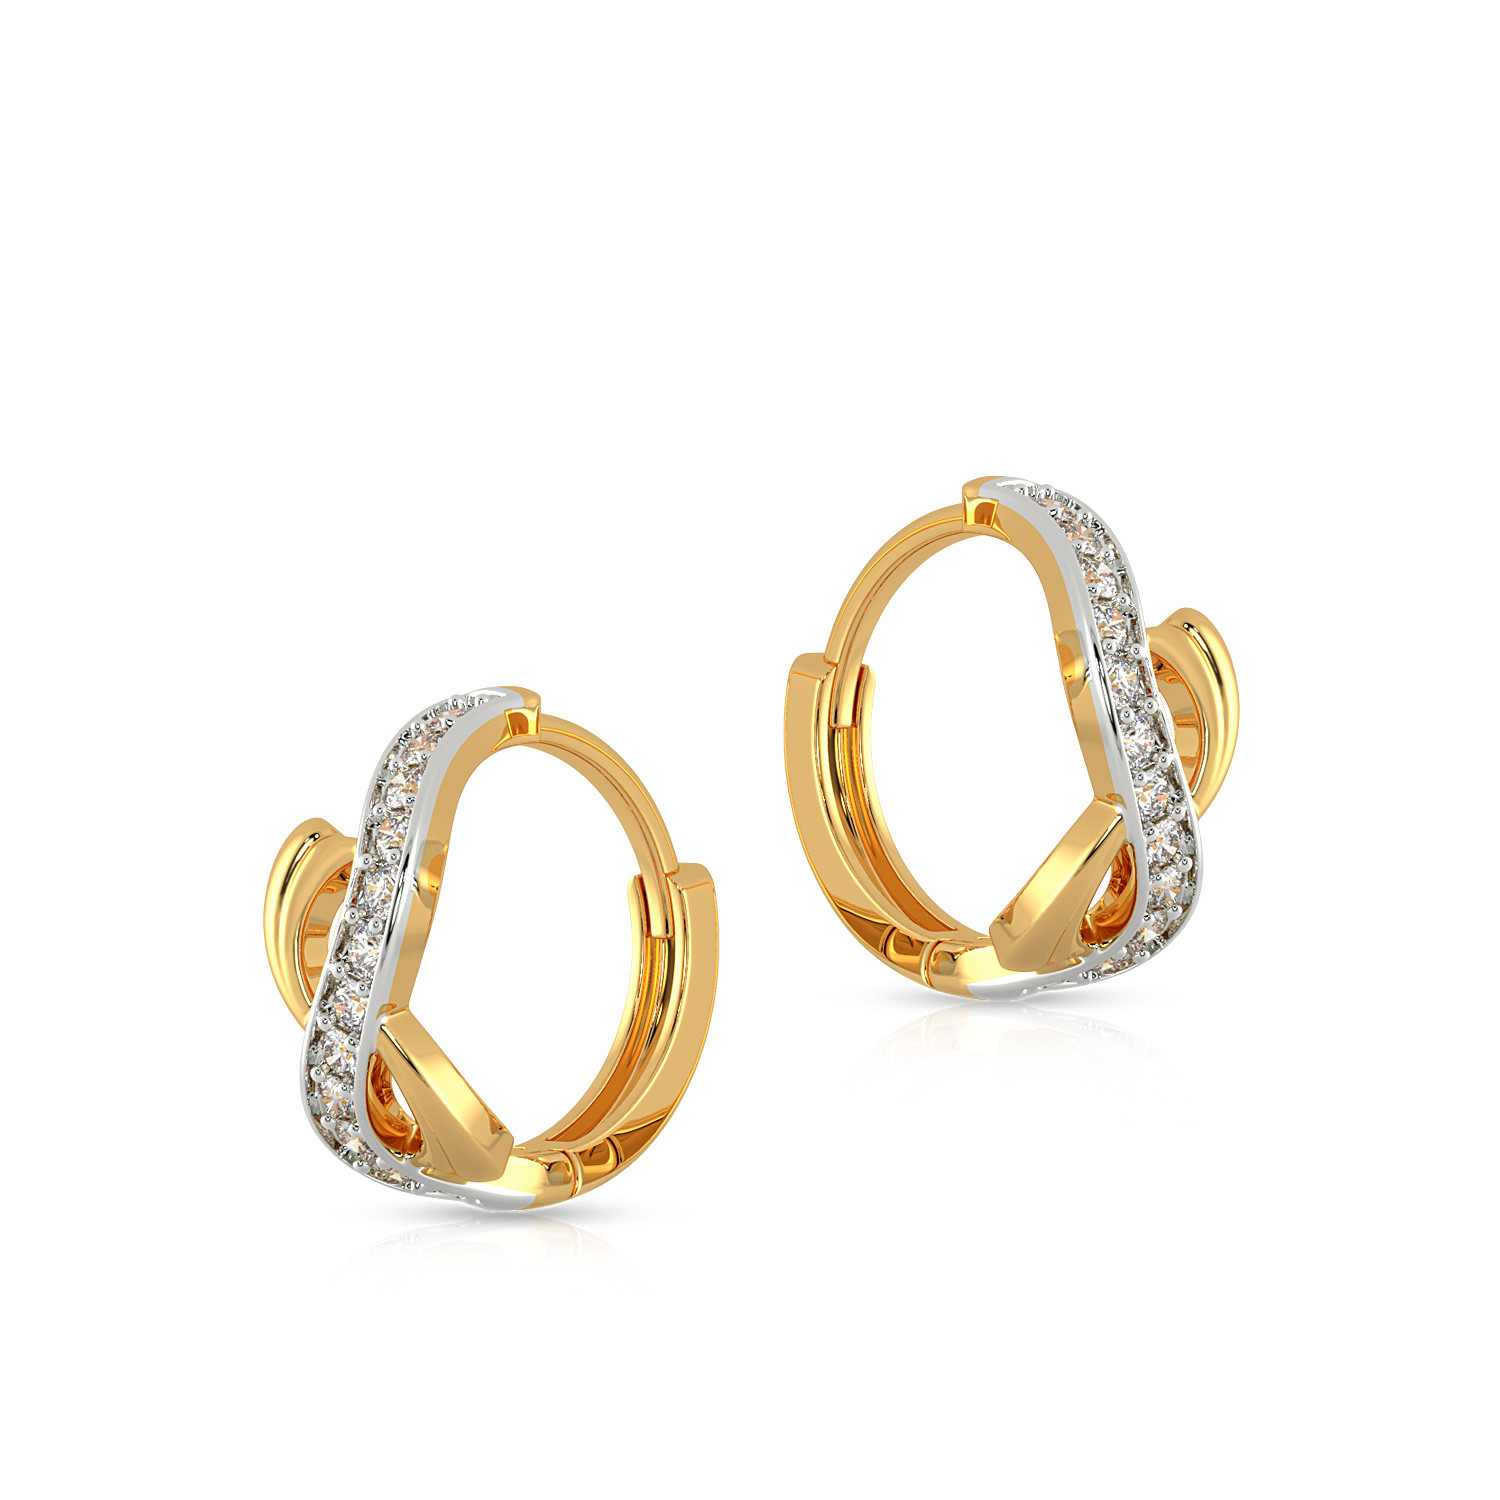 Malabar Gold and Diamonds Collection 22k Yellow Gold and Cubic Zirconia  Stud Earrings  Amazonin Jewellery